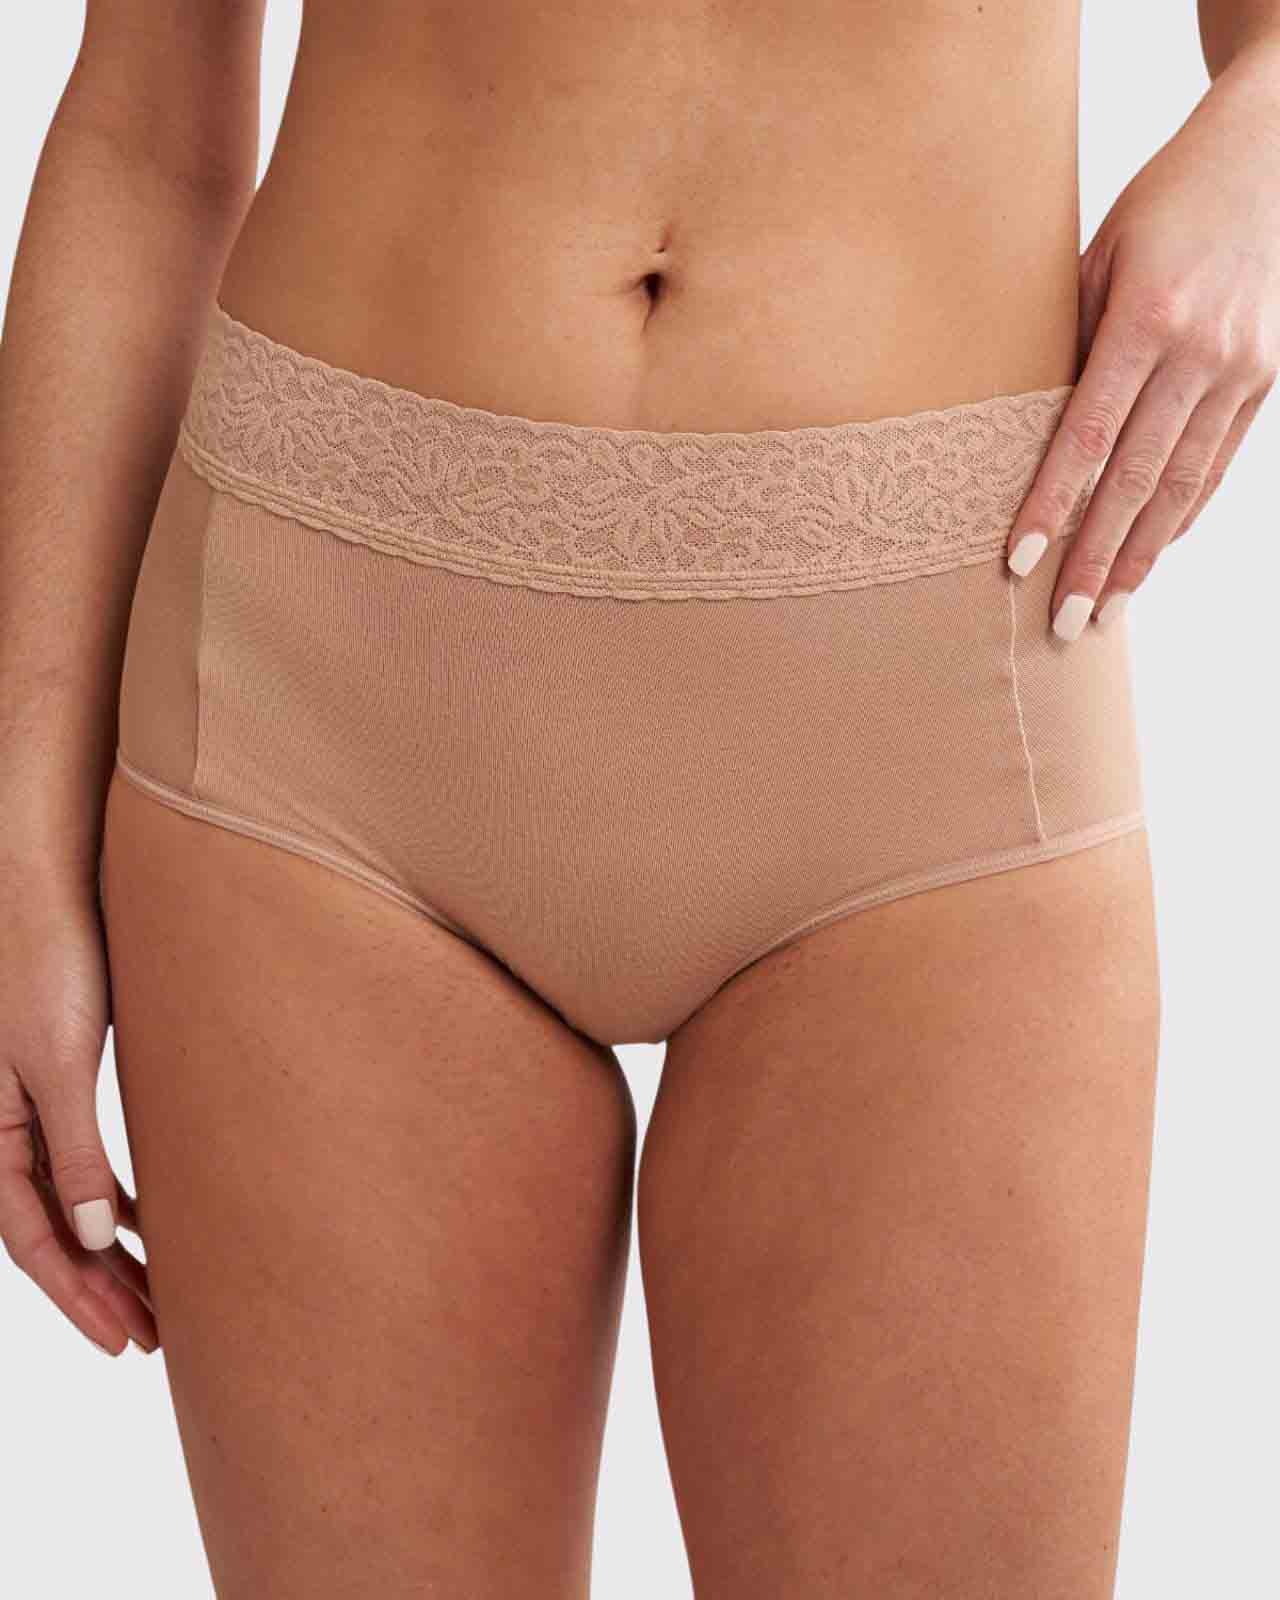 Women's Underwear Cotton Super High Waisted Briefs Soft Stretch Full  Coverage Panties Lace Embroidery Underpants